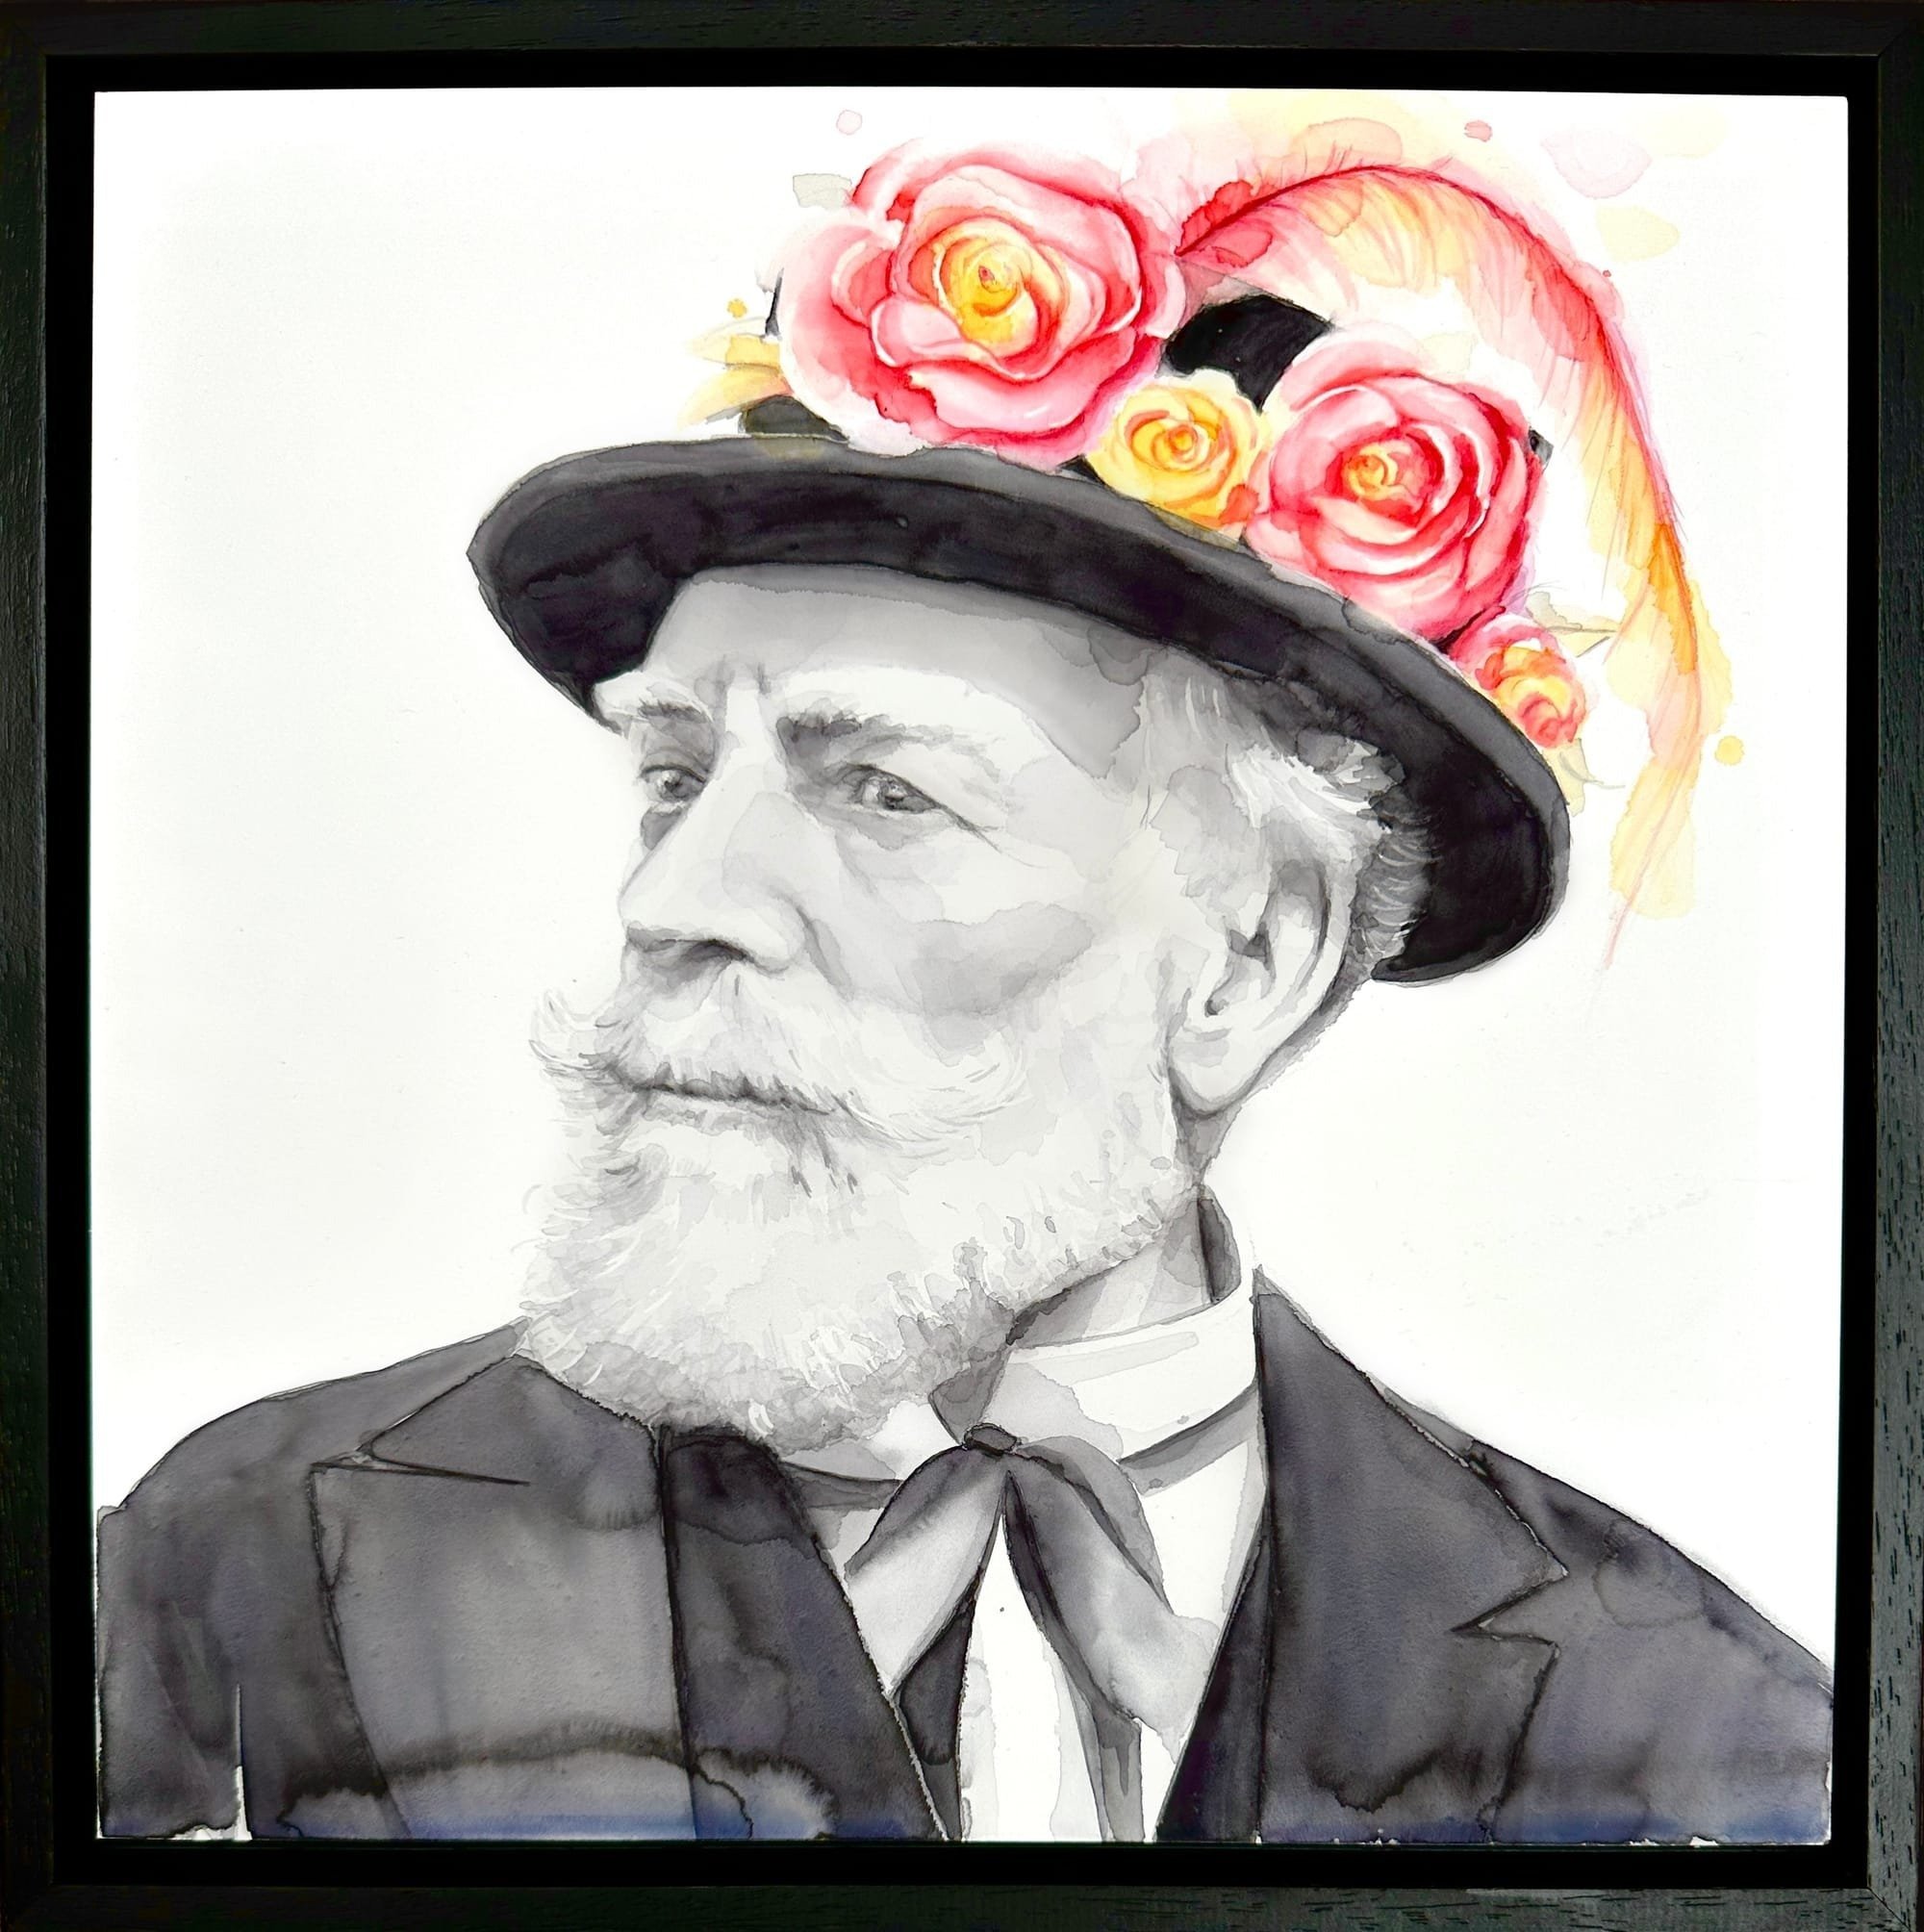 Vote for my portrait of James Ensor and WIN a free portrait!